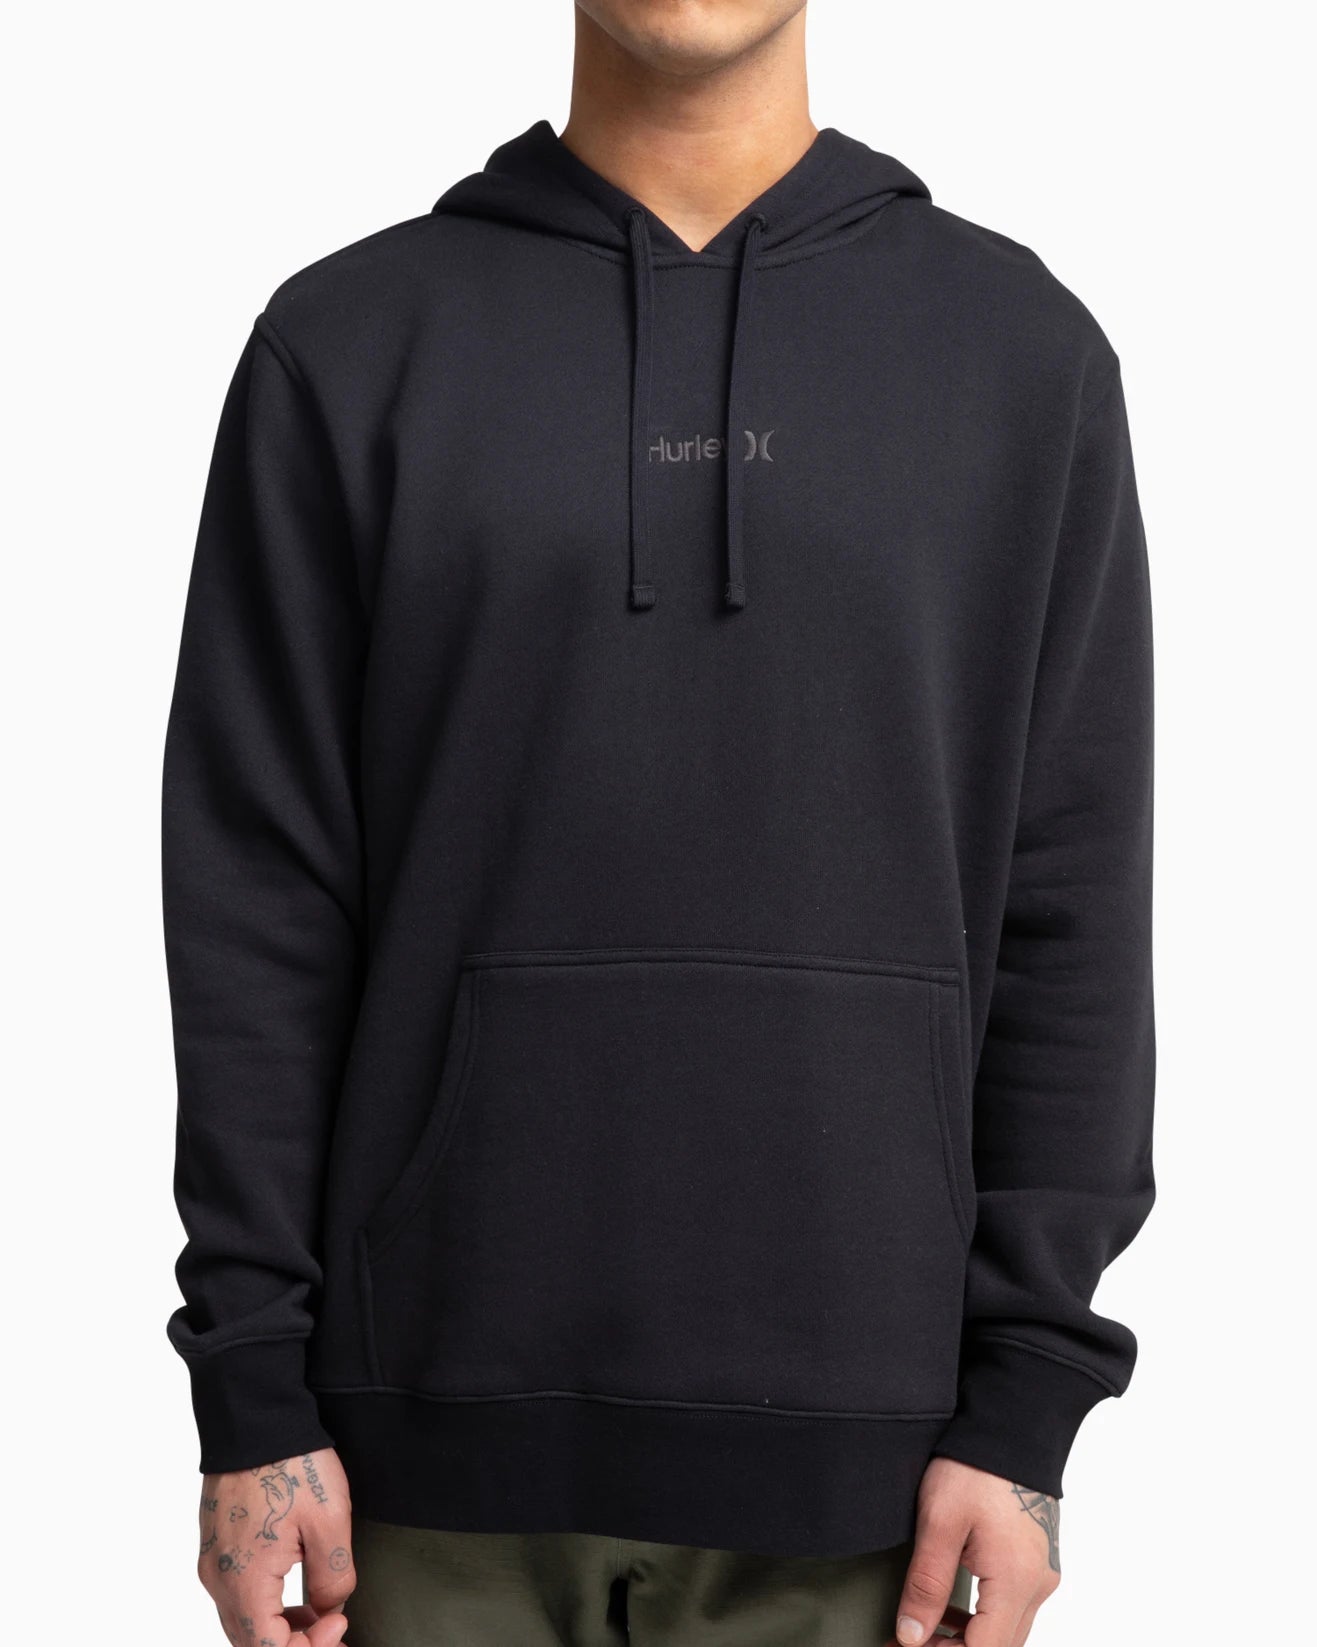 one and only mens black hoodie, hurley